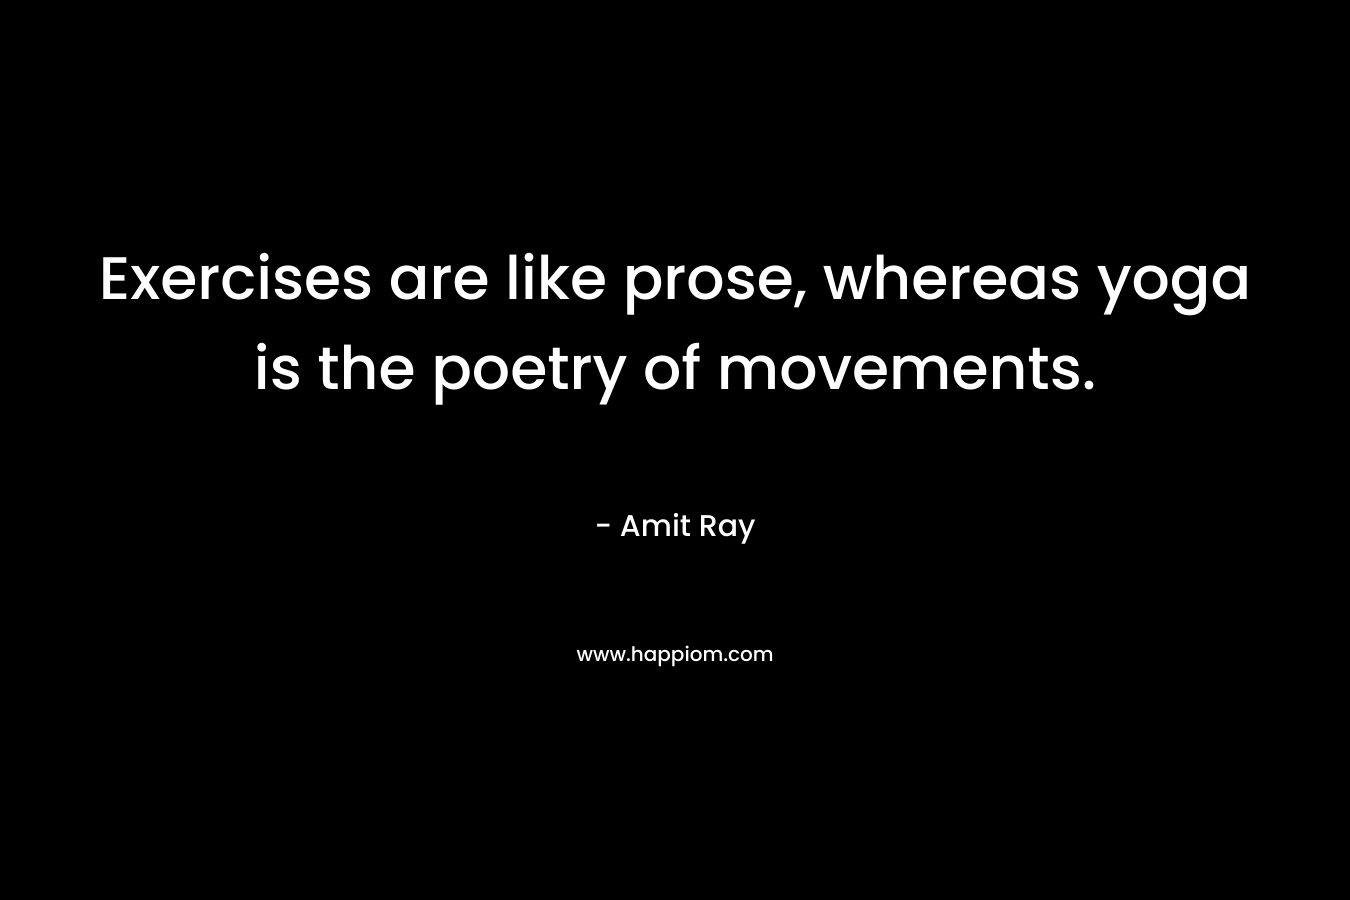 Exercises are like prose, whereas yoga is the poetry of movements.